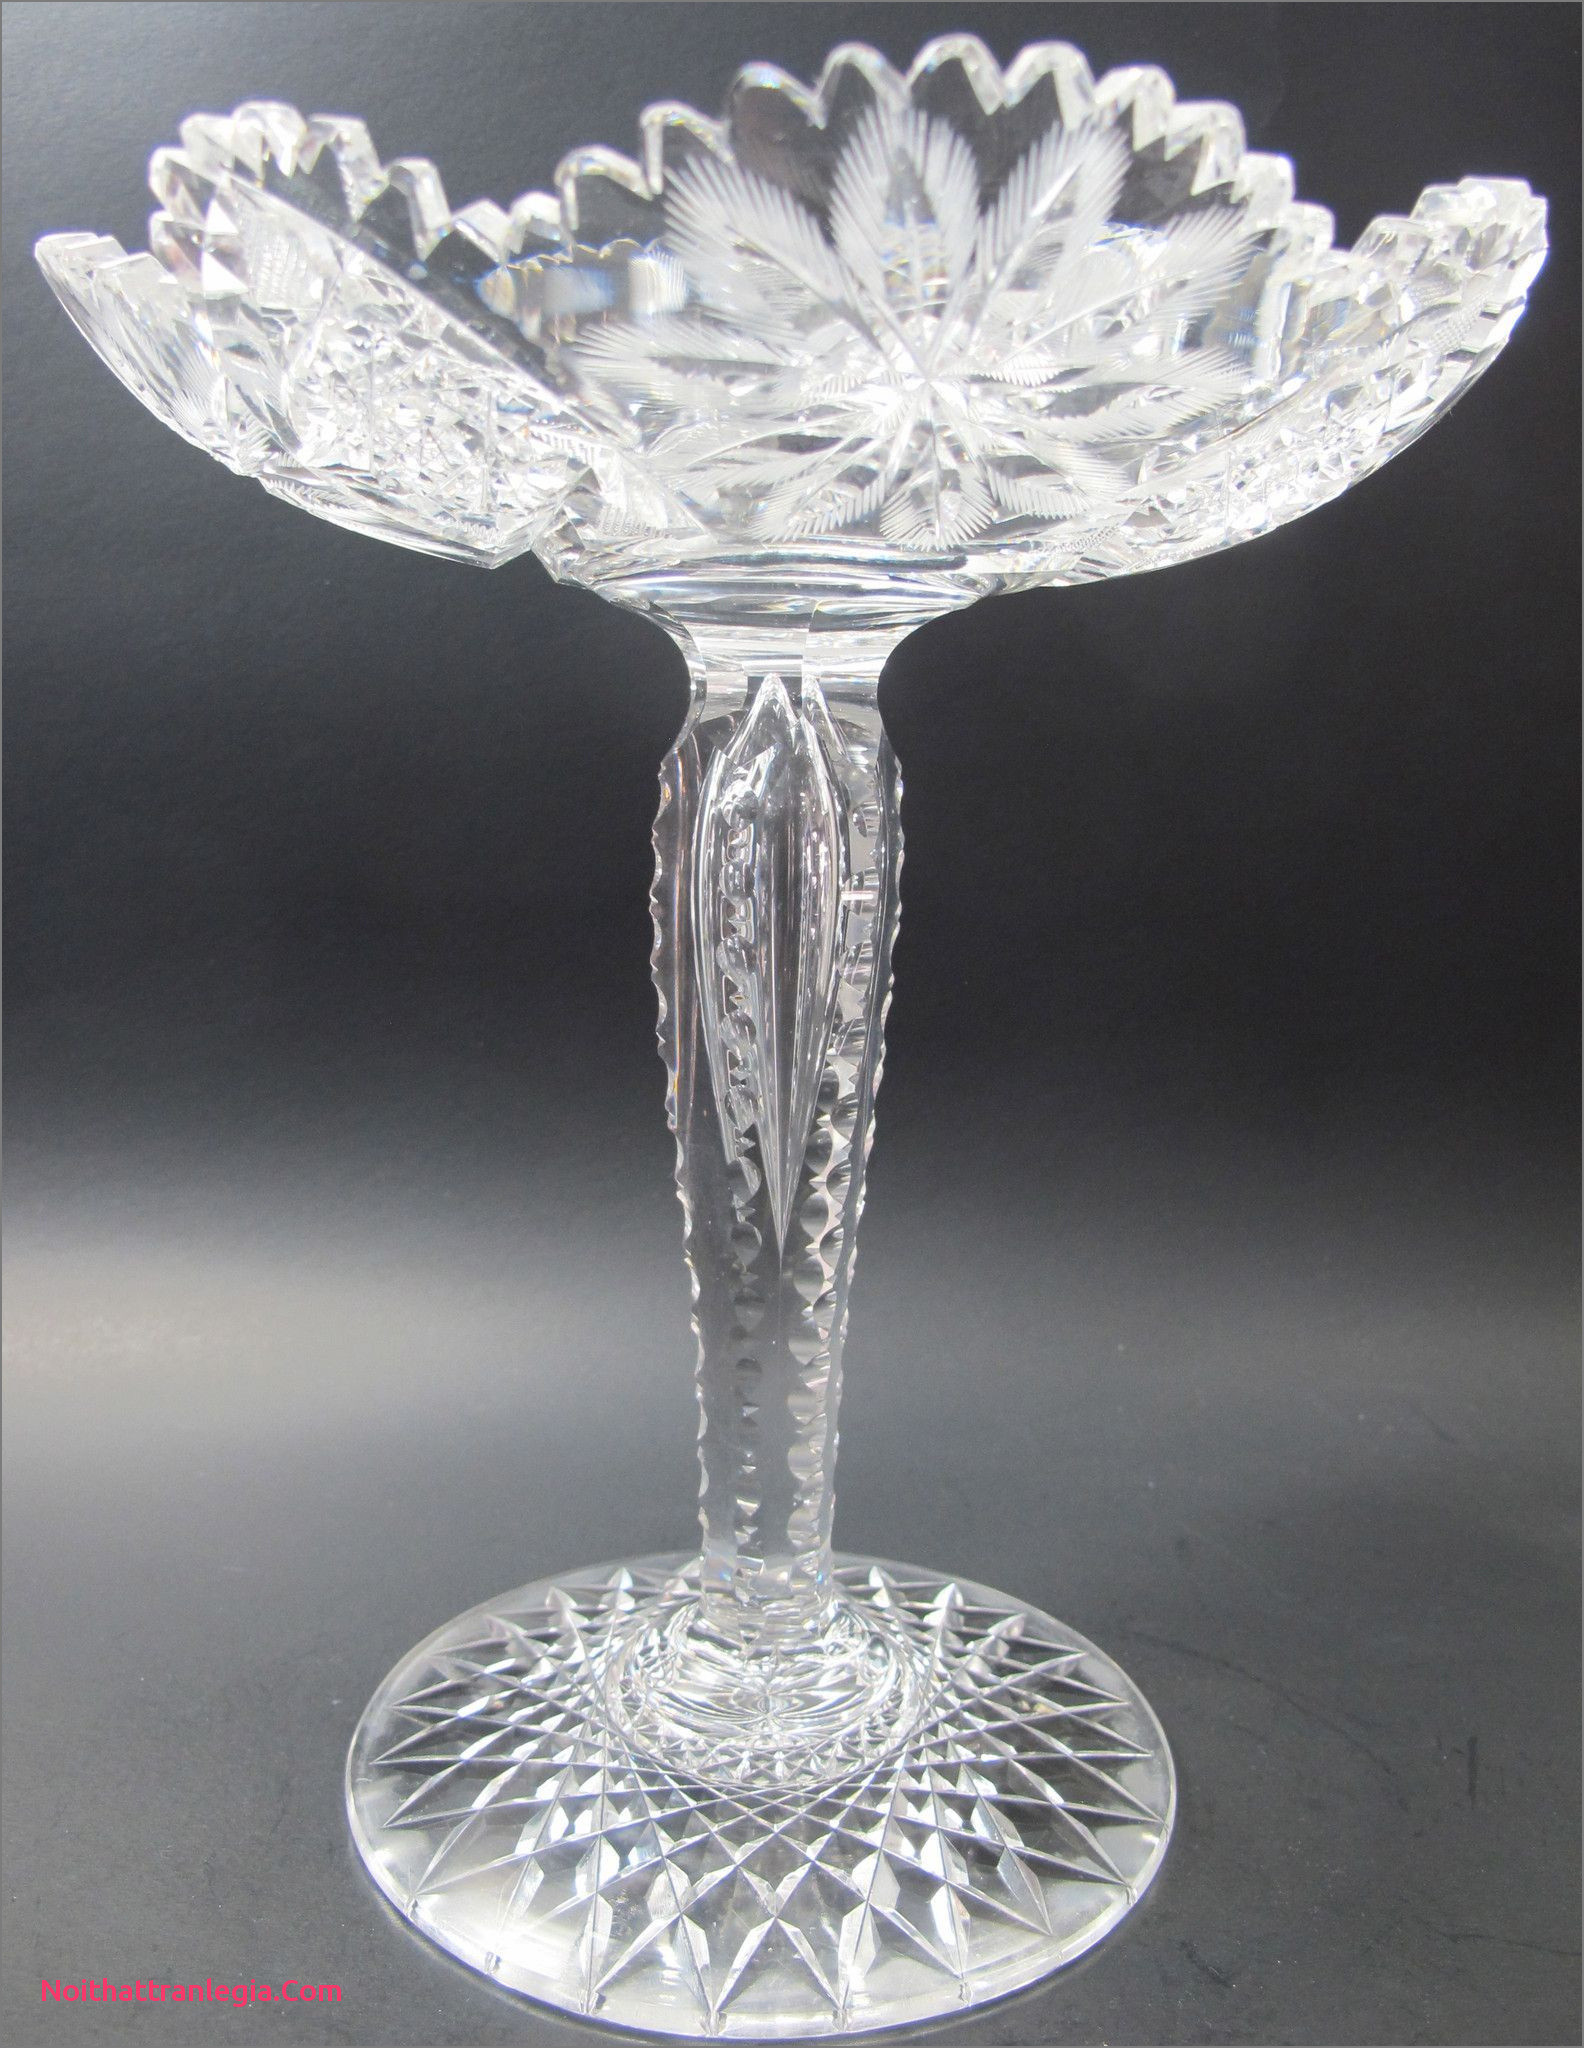 14 Cute Vintage Cut Glass Vase 2023 free download vintage cut glass vase of 20 cut glass antique vase noithattranlegia vases design in fering this abp antique cut glass pote from the american brilliant period 1886 1916 9 5